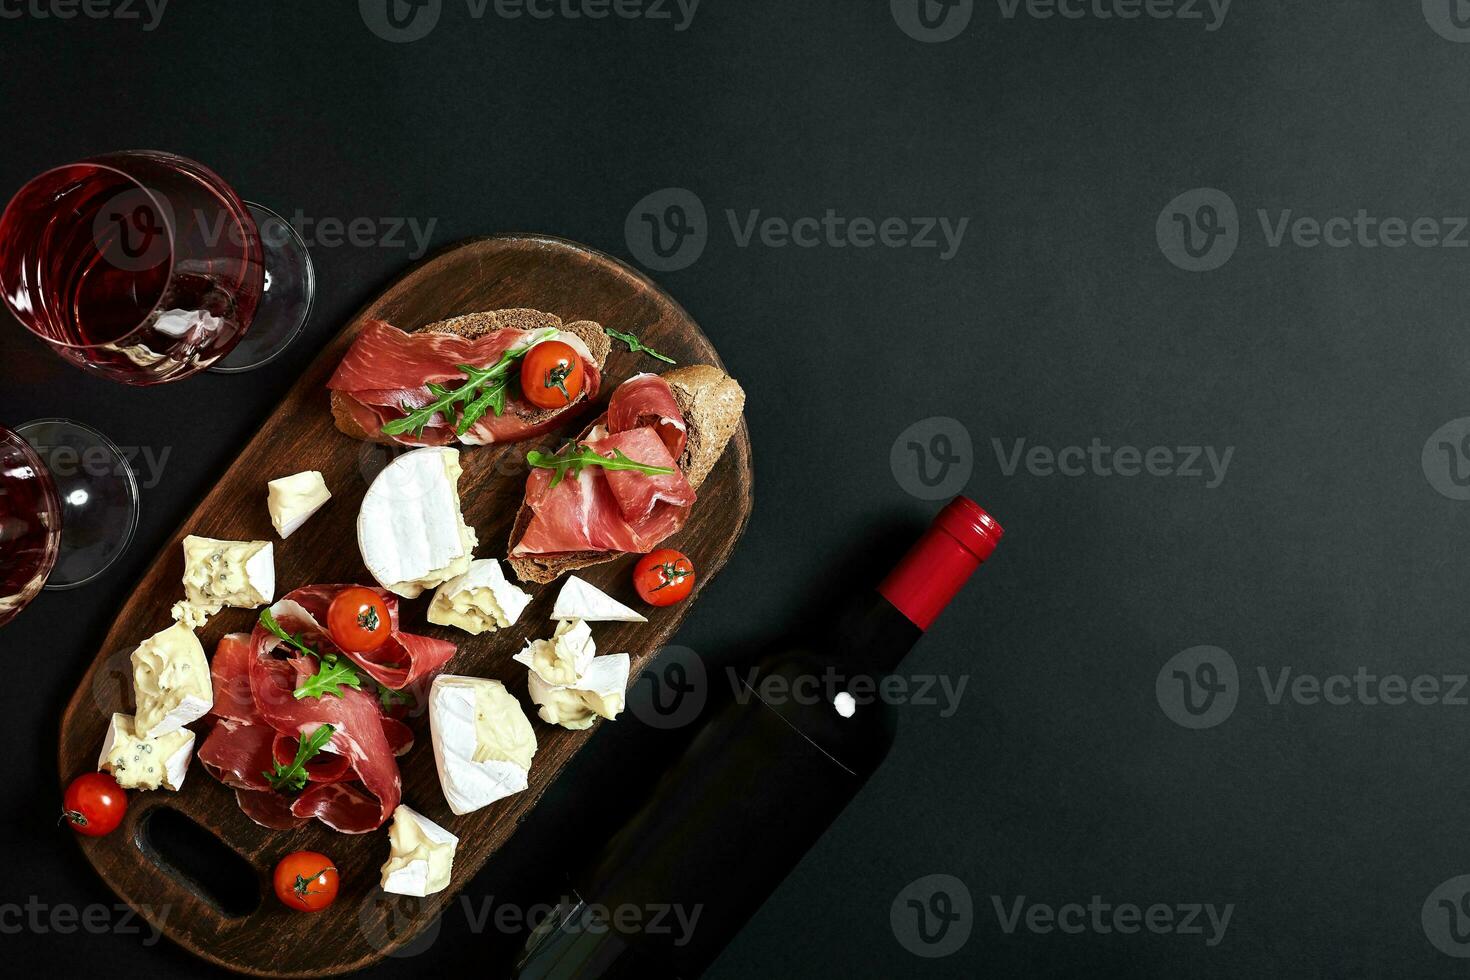 Delicious appetizer to wine - ham, cheese, baguette slices, tomatoes, served on a wooden board, and glass with red wine on black surface photo